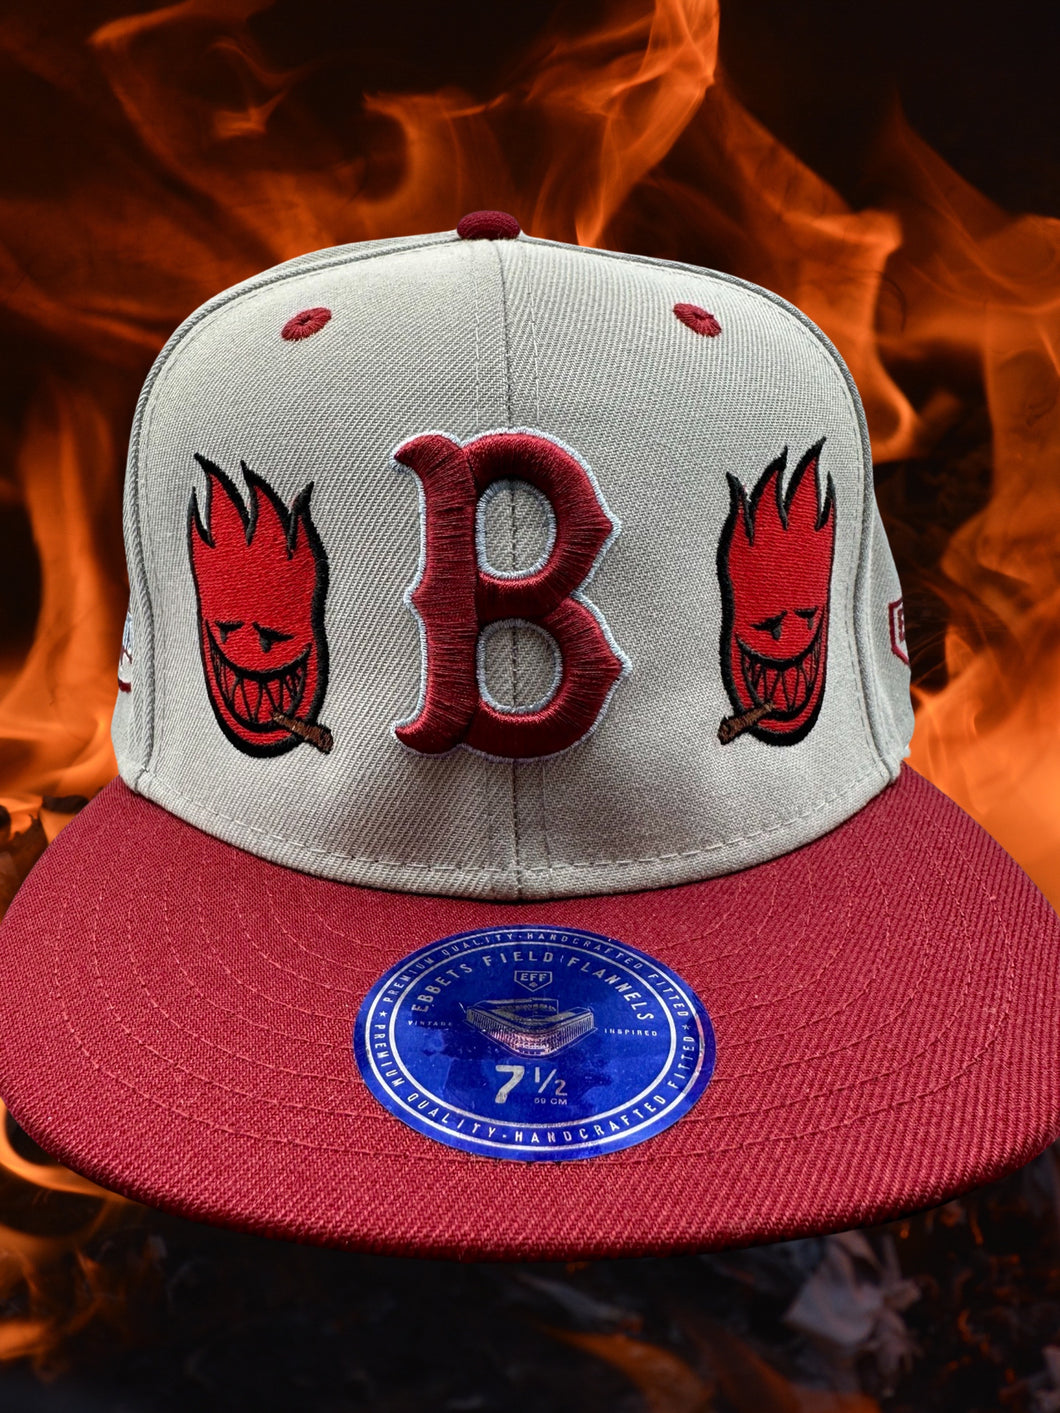 Flamed up in Boston